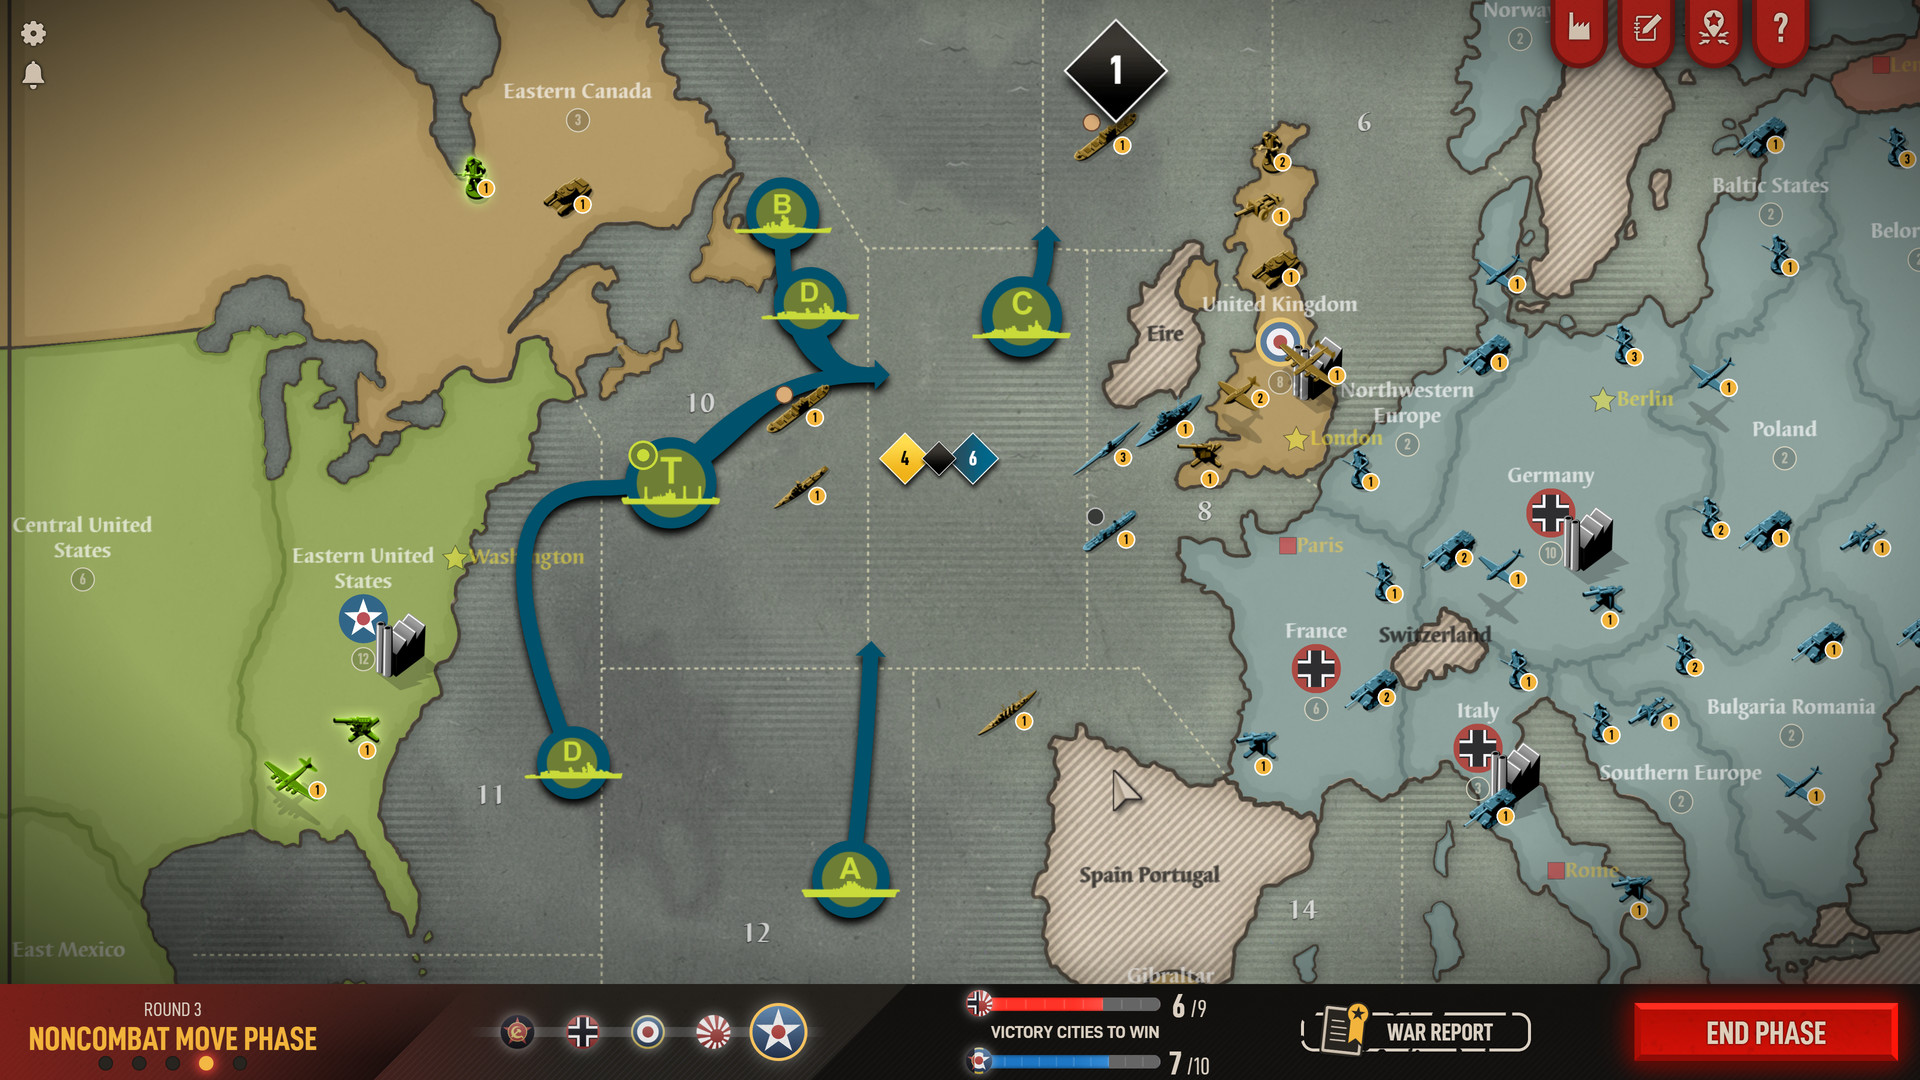 axis and allies computer game 1942